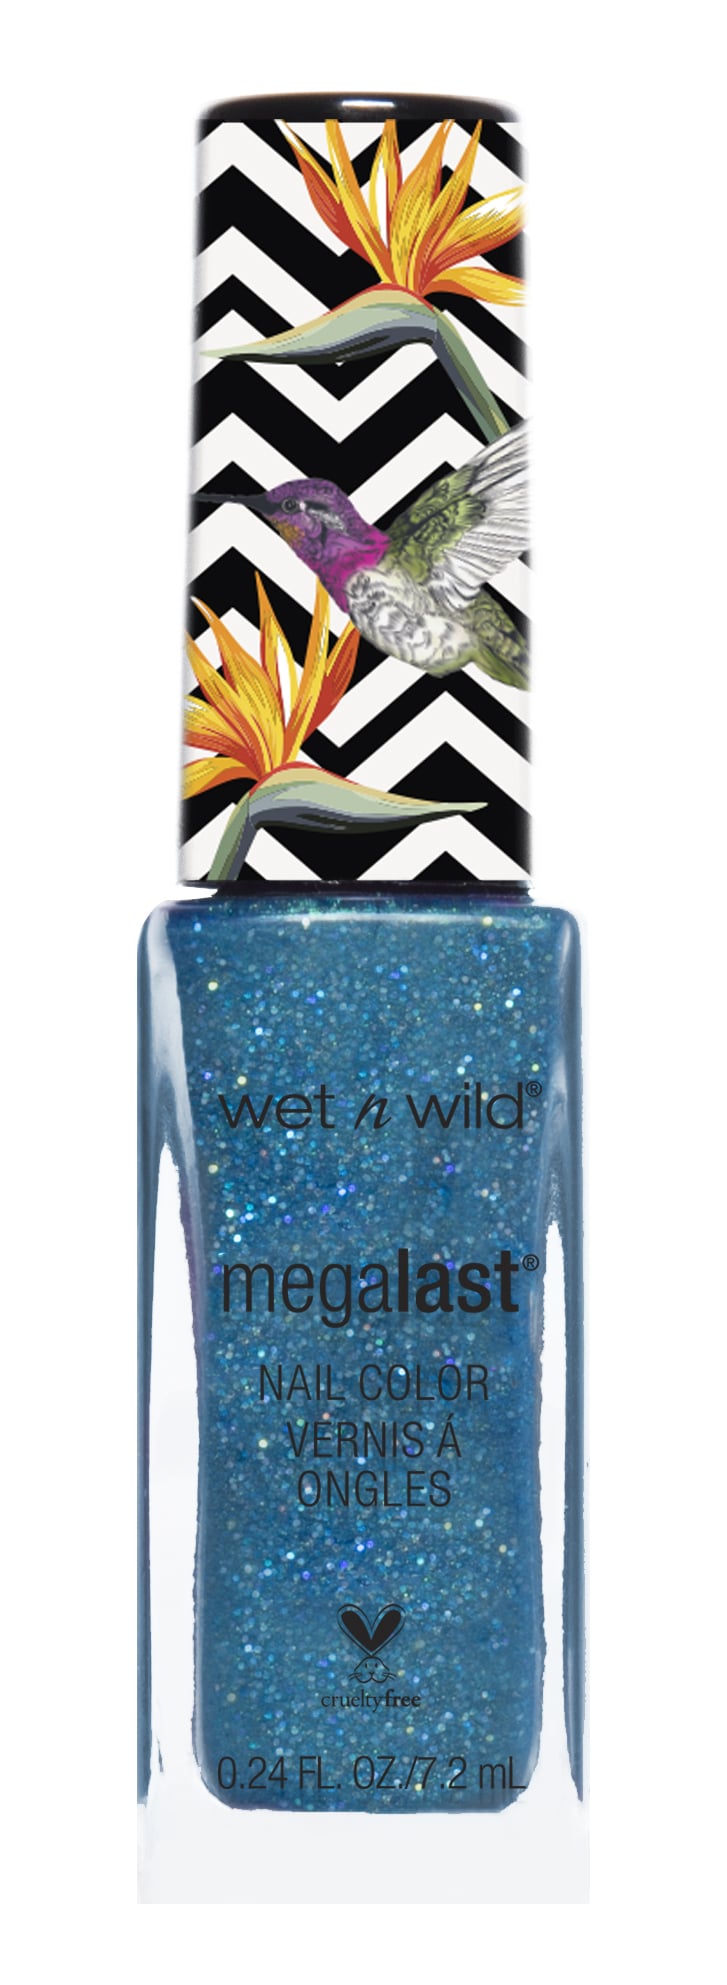 Wet n Wild Flights of Fancy MegaLast Nail Color in The High Life